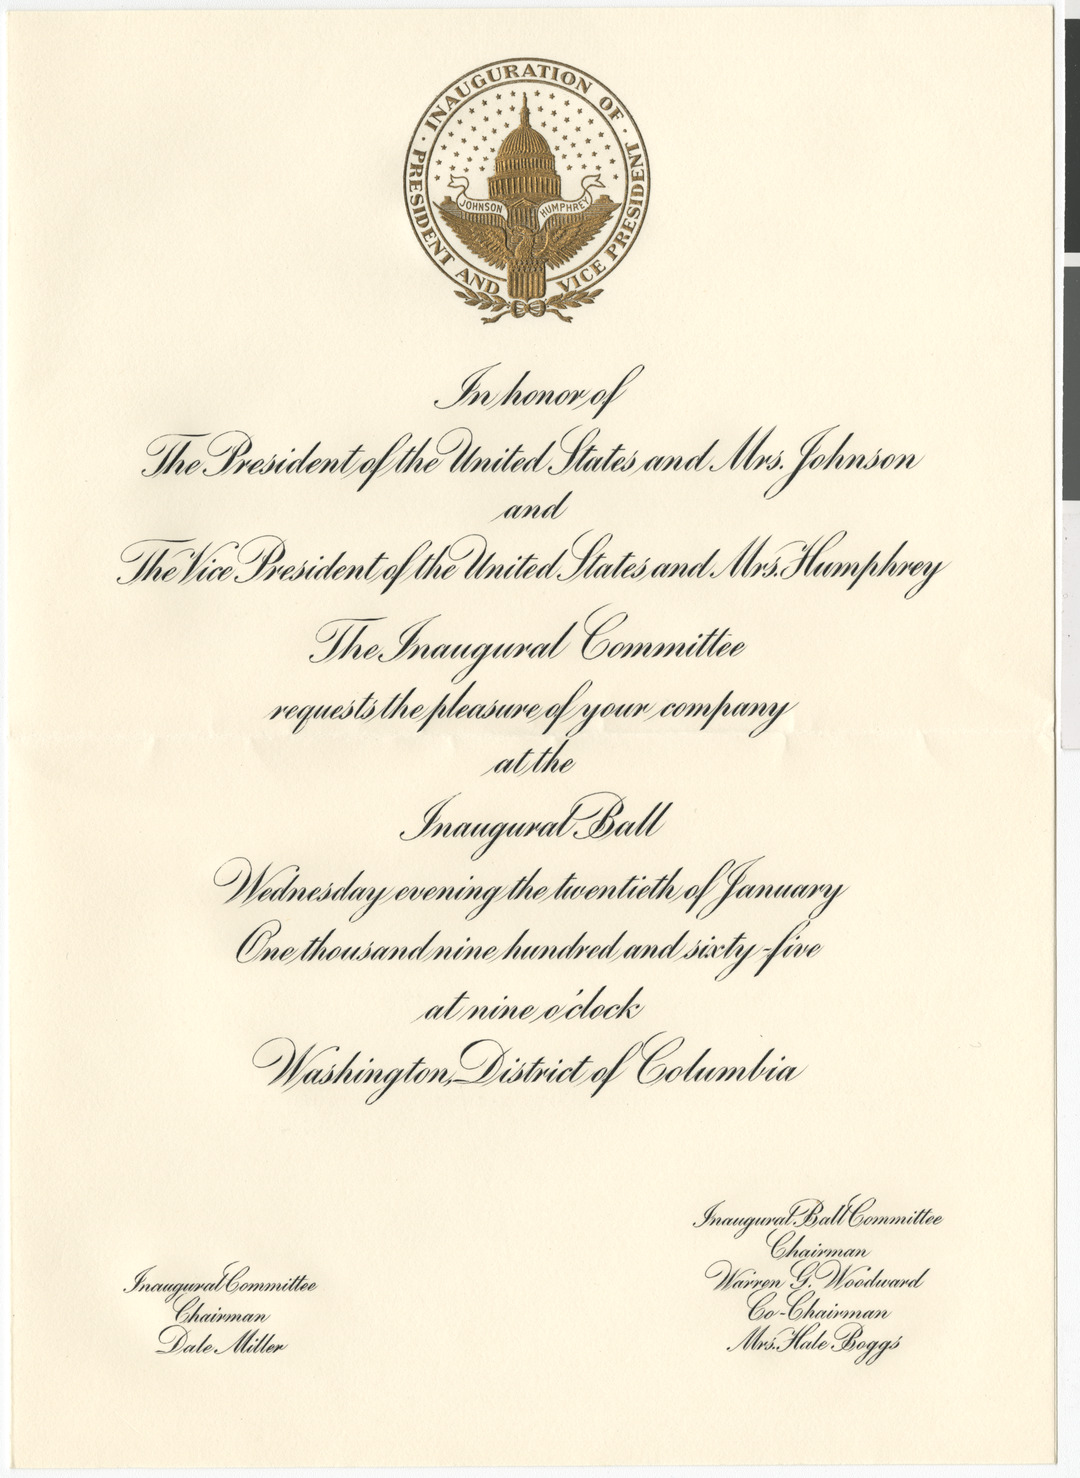 Invitation to the Presidential Inaugural Ball, 1965